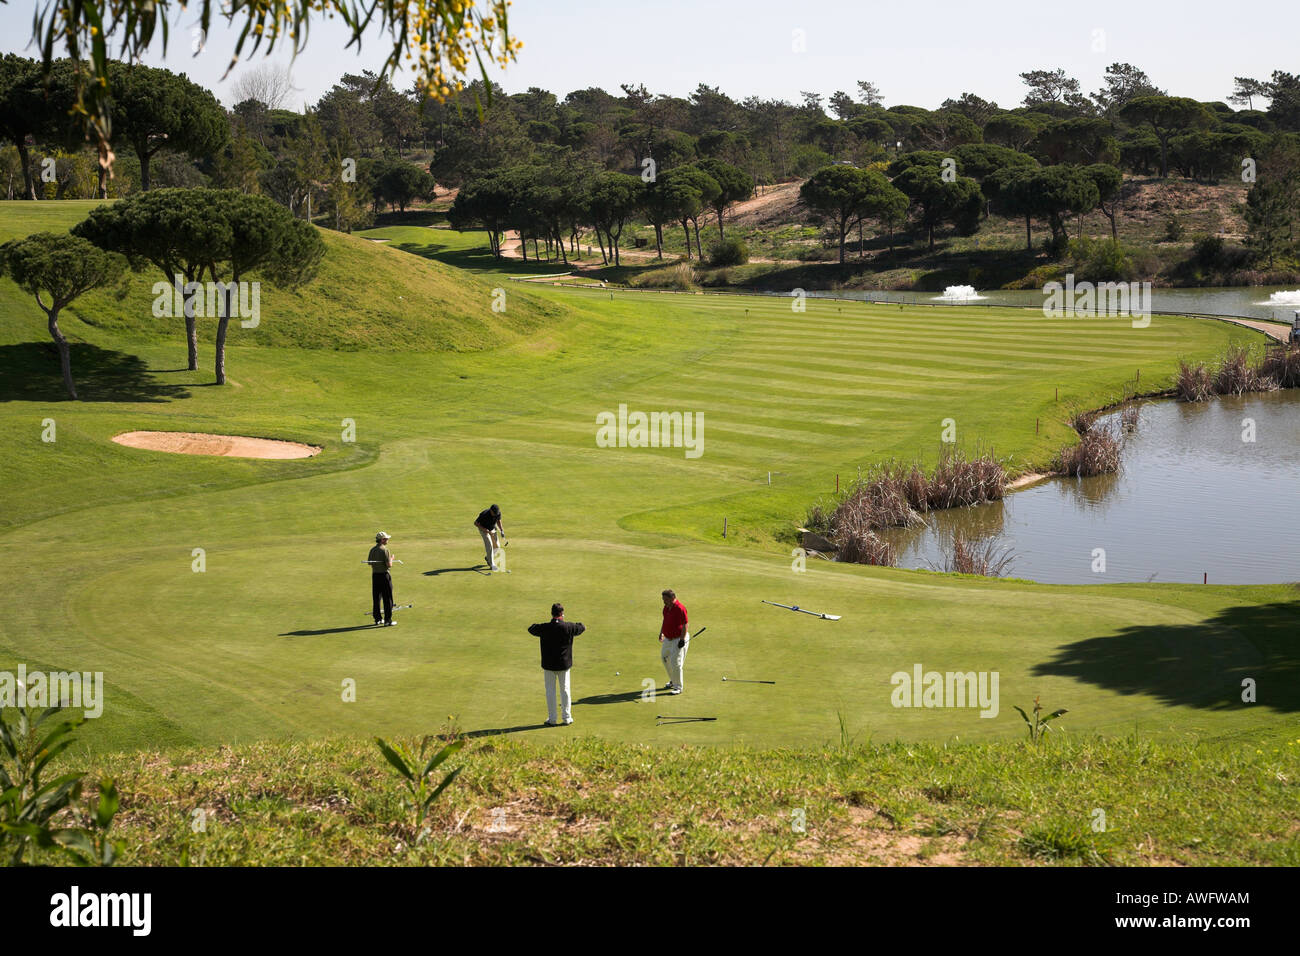 Four golf players on the green. Stock Photo